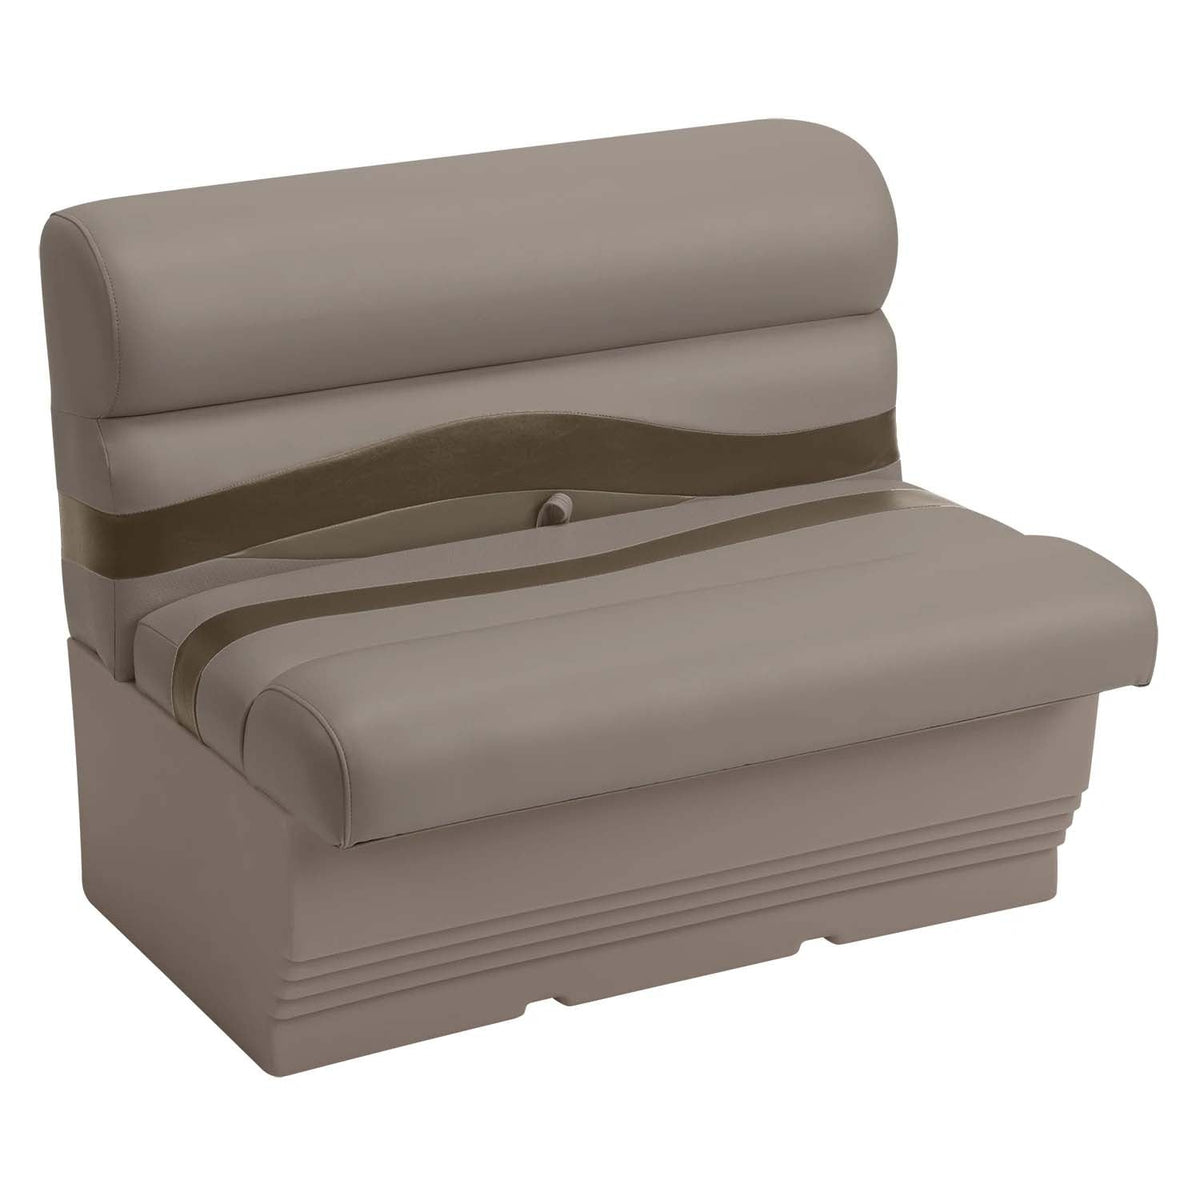 Wise Not Qualified for Free Shipping Wise 36" Bench Seat with Base #BM1144-1749